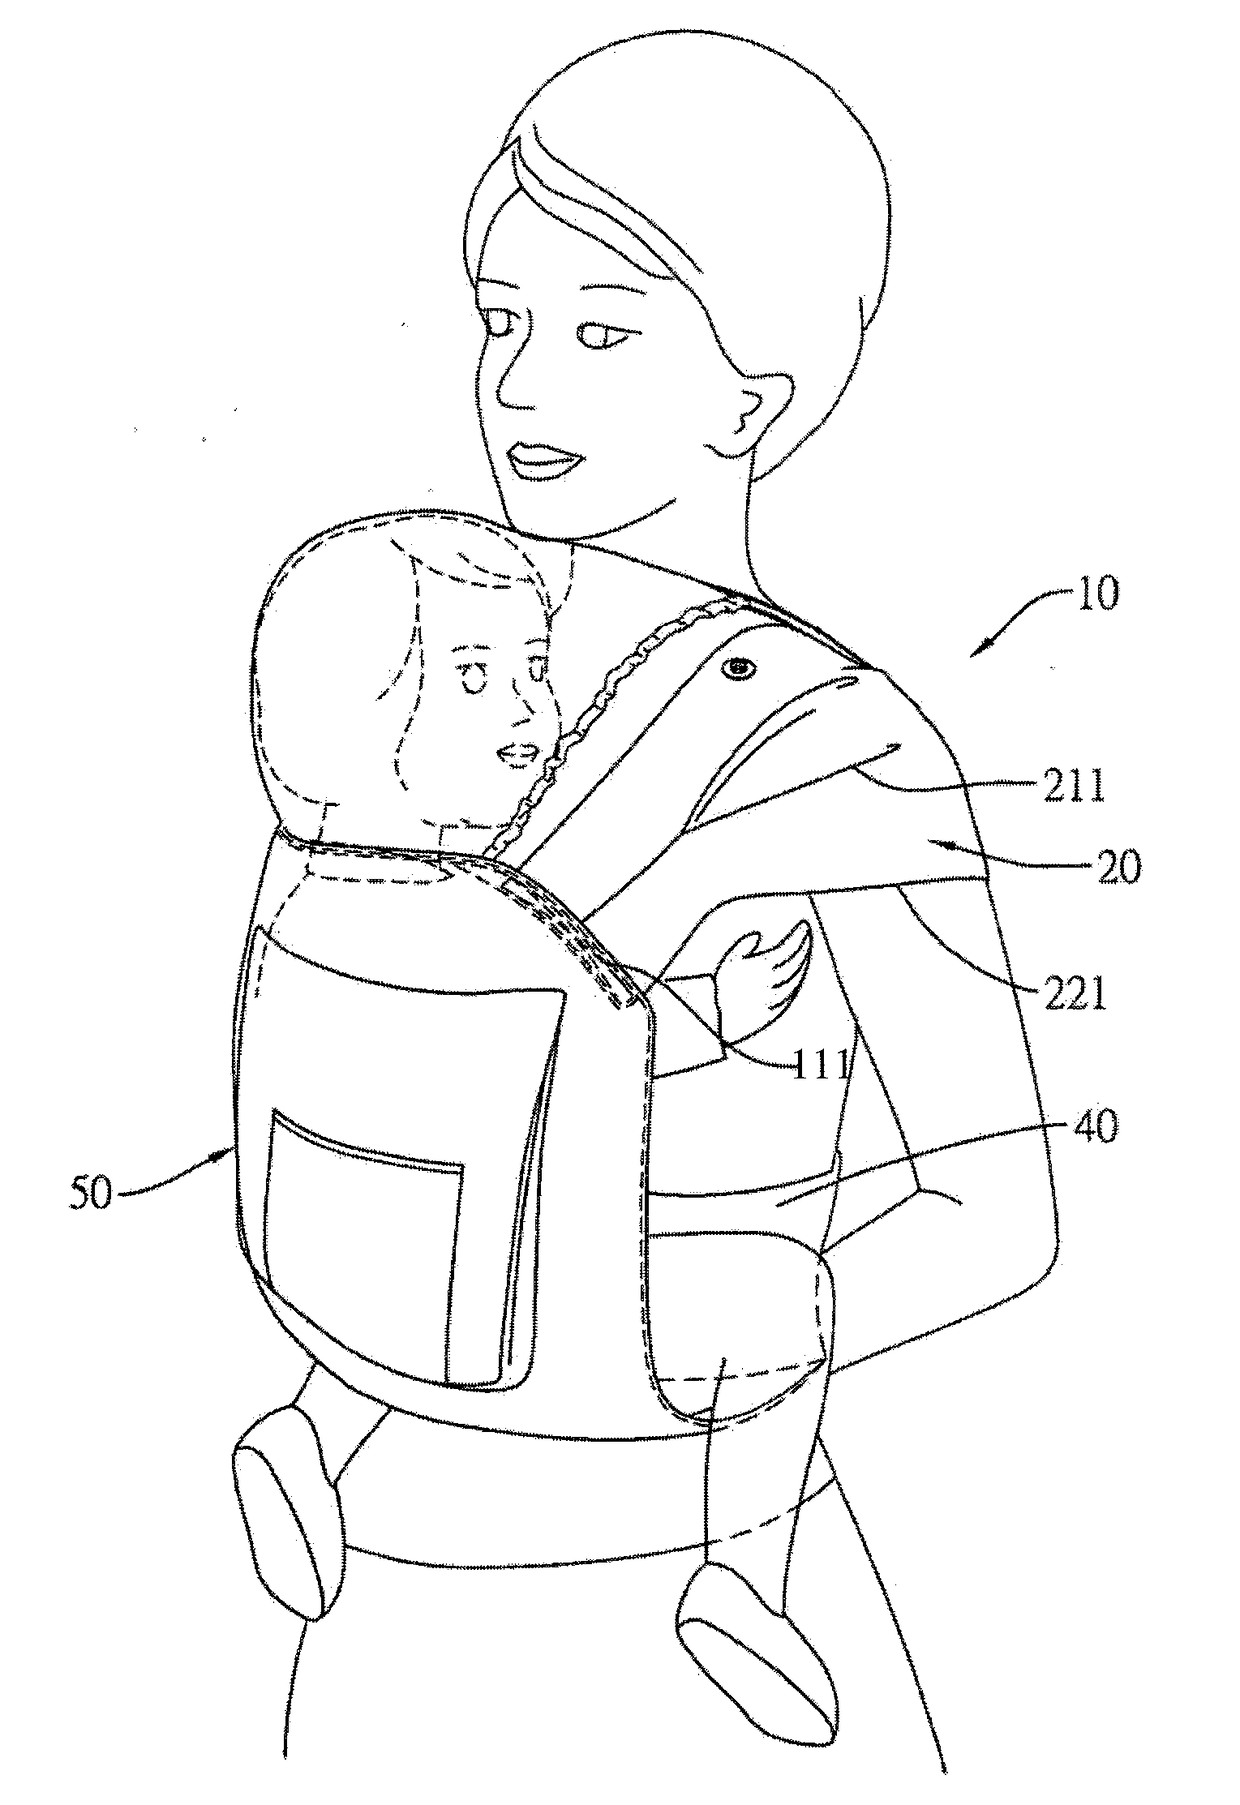 Shoulder strap applicable to baby carrier